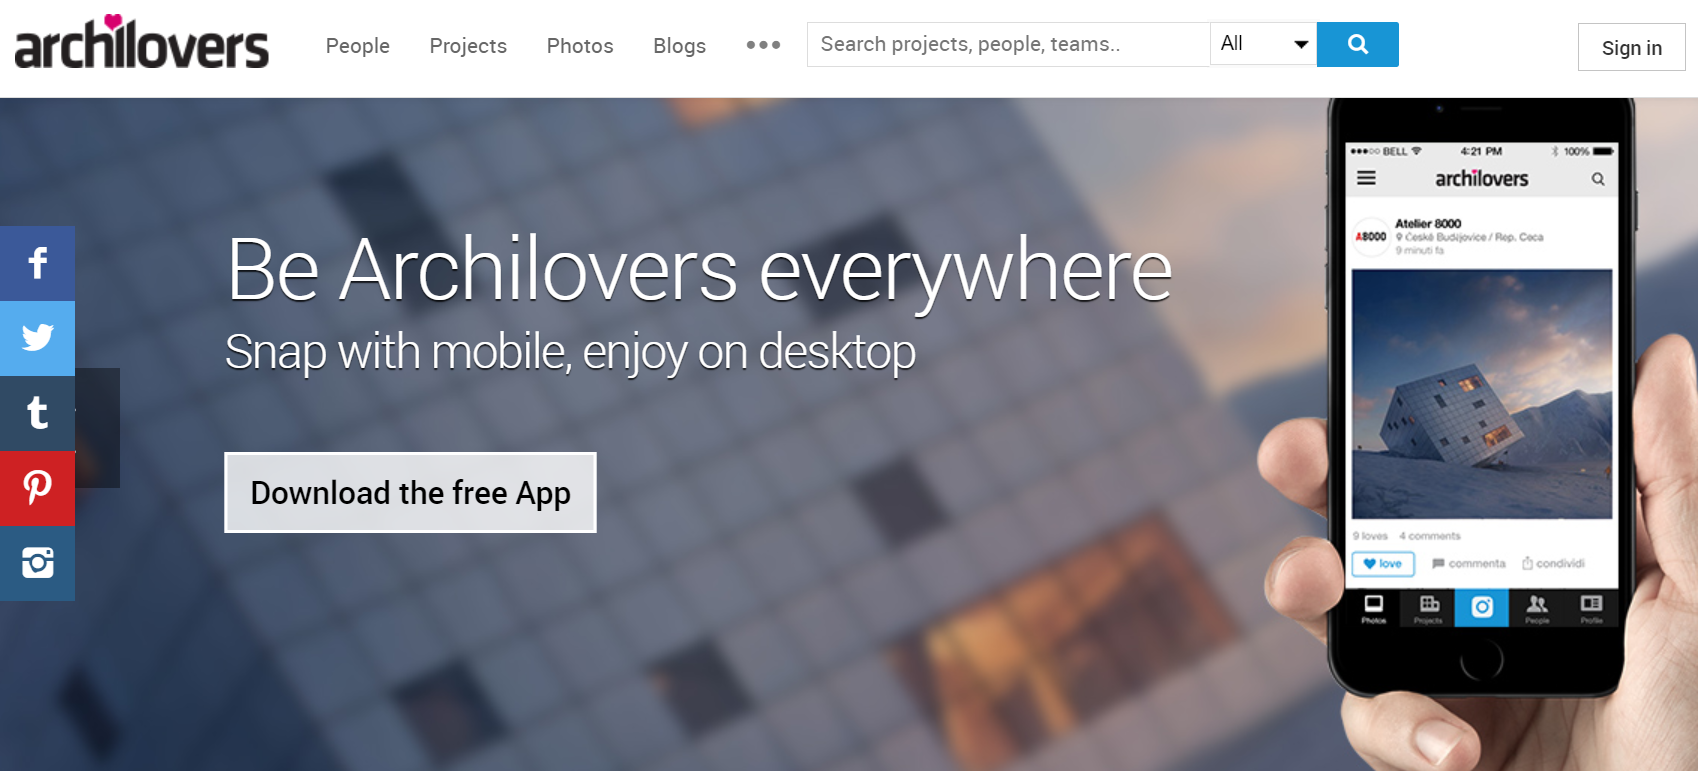 Archilovers Social Media Platform for Architects